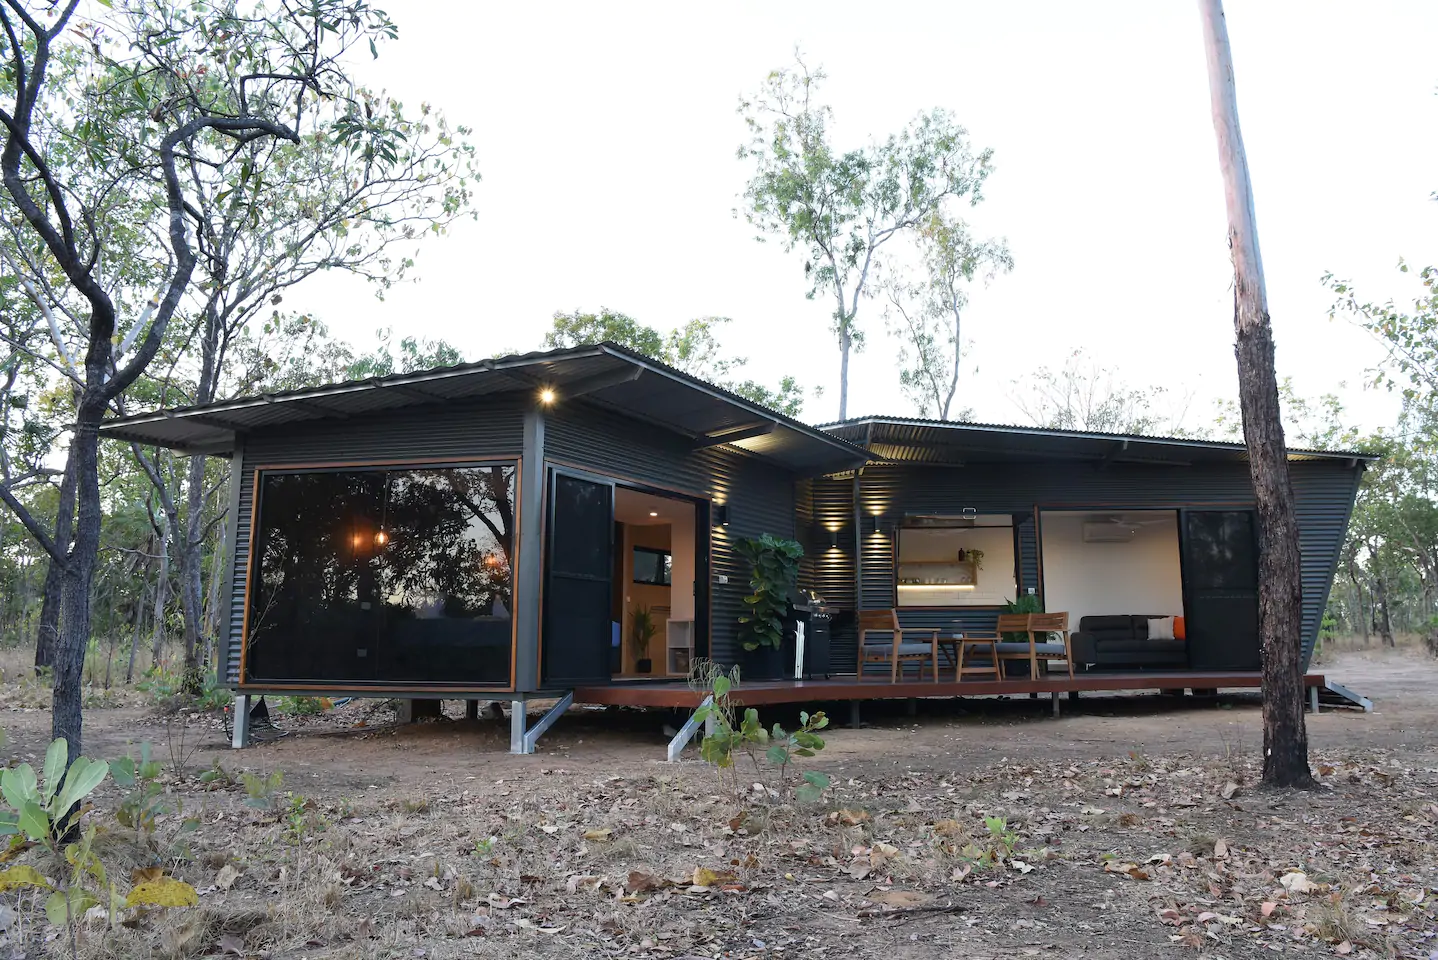 Shipping Container Homes Good Or Bad Idea As Tiny Houses Ecohome